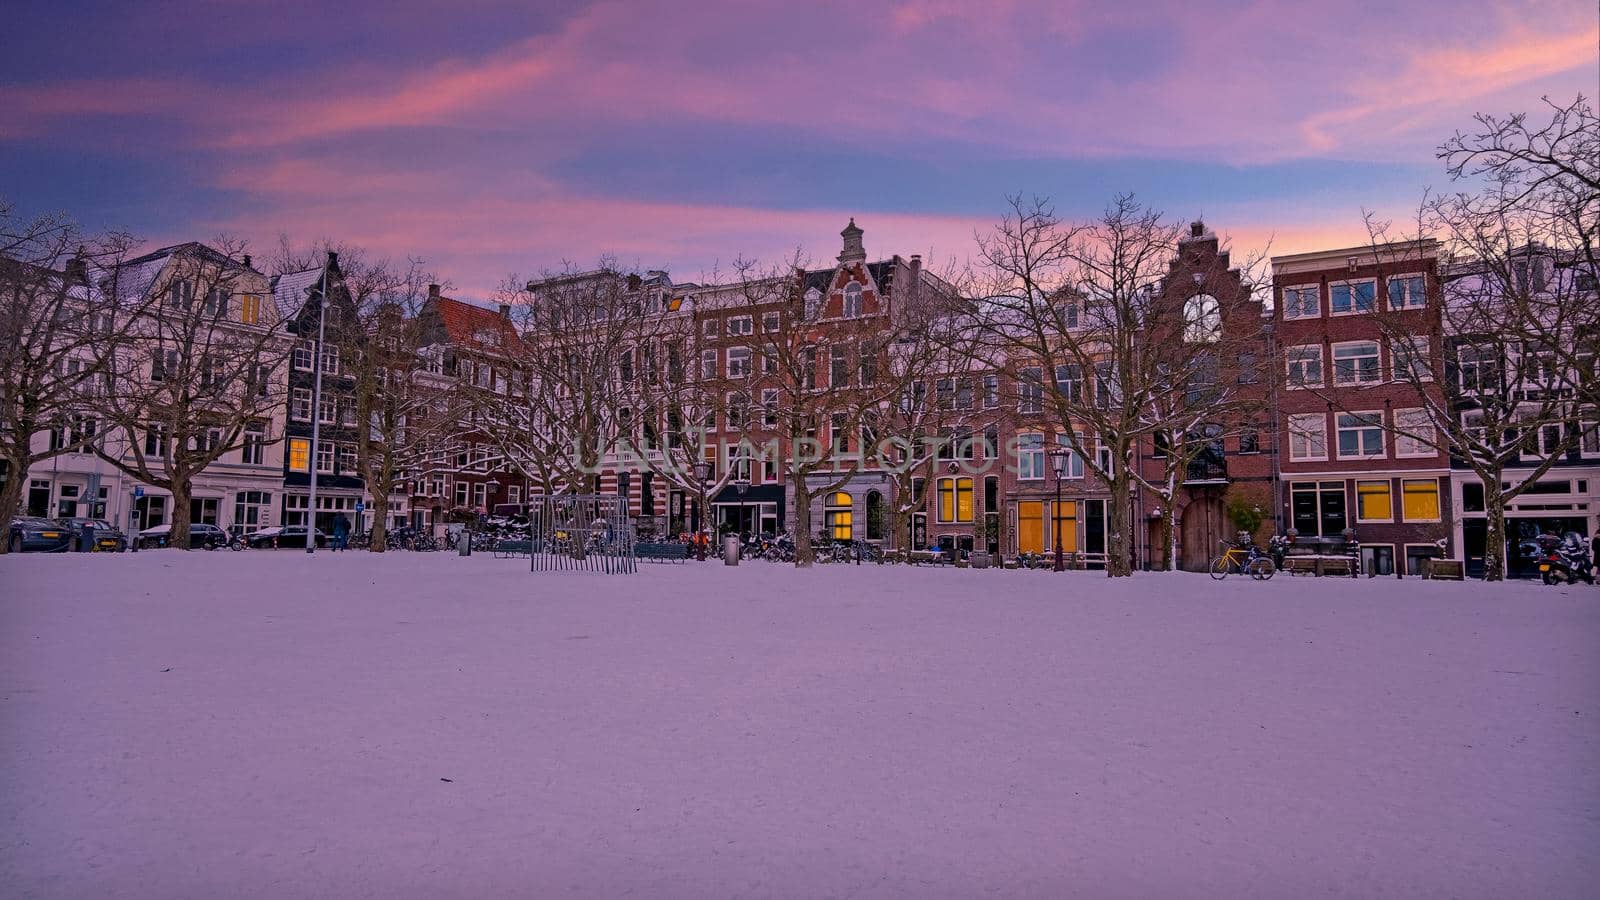 City scenic from a snowy Amsterdm in winter in the Netherlands